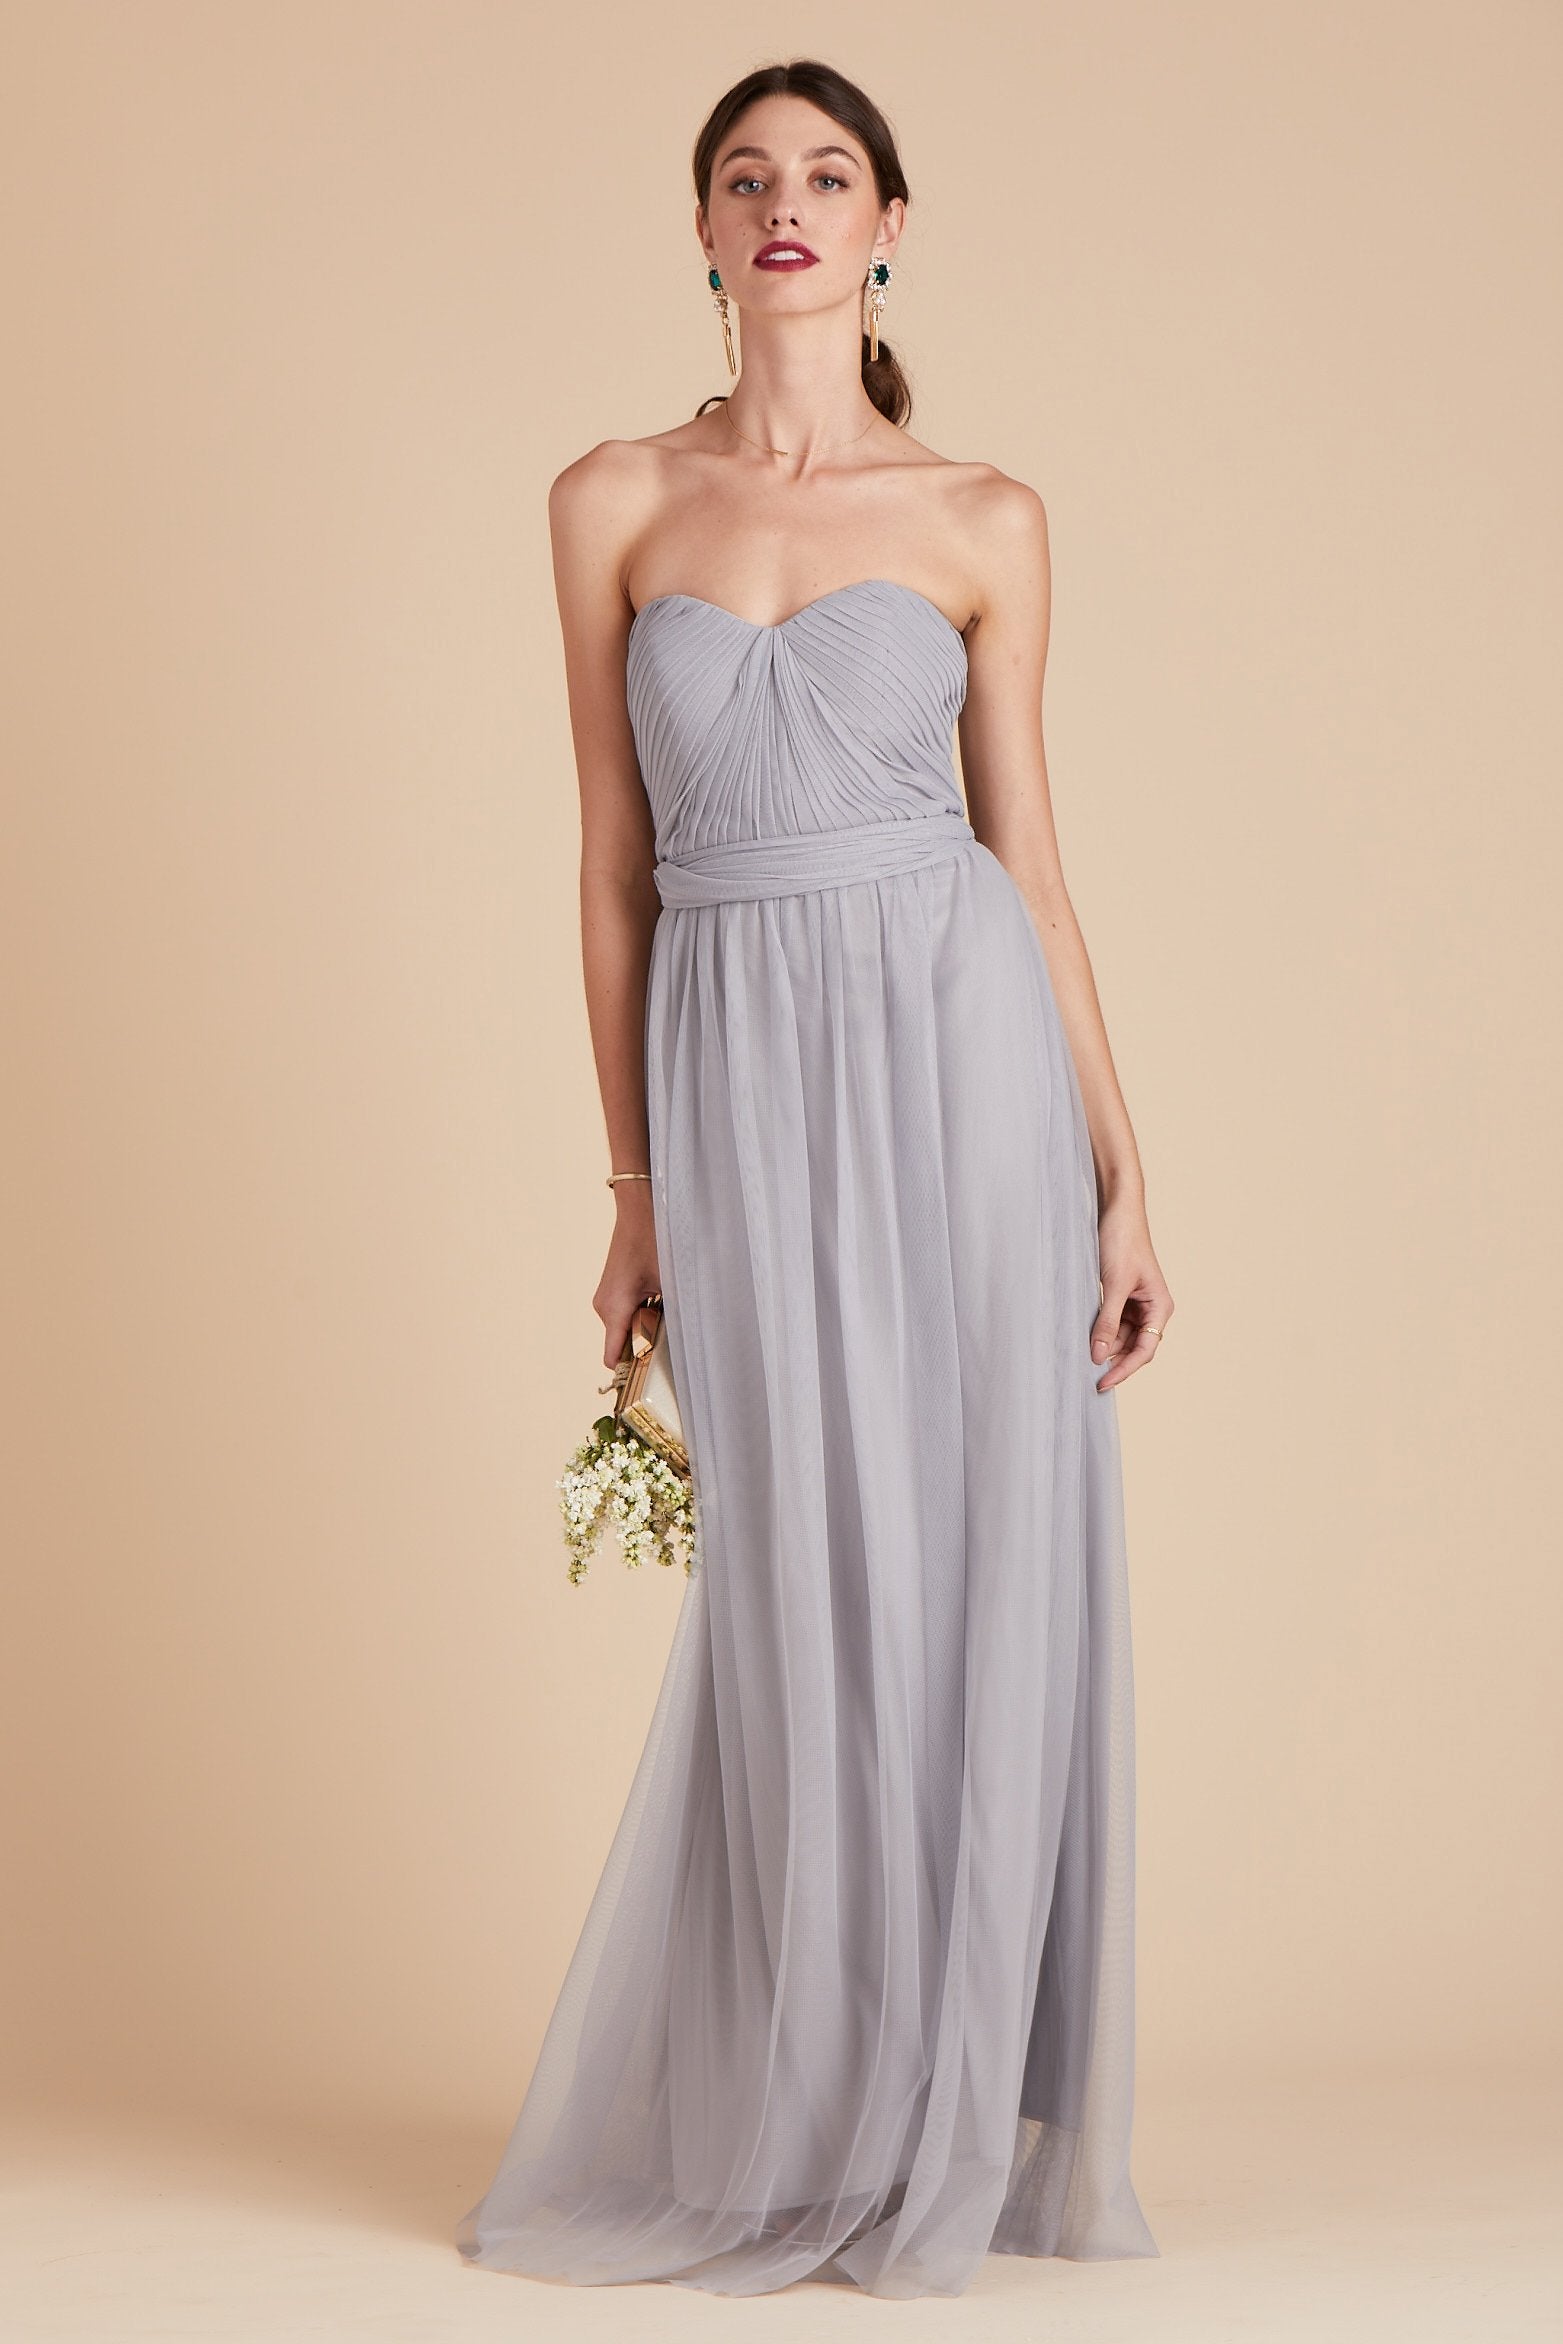 Christina convertible bridesmaid dress in silver tulle by Birdy Grey, front view